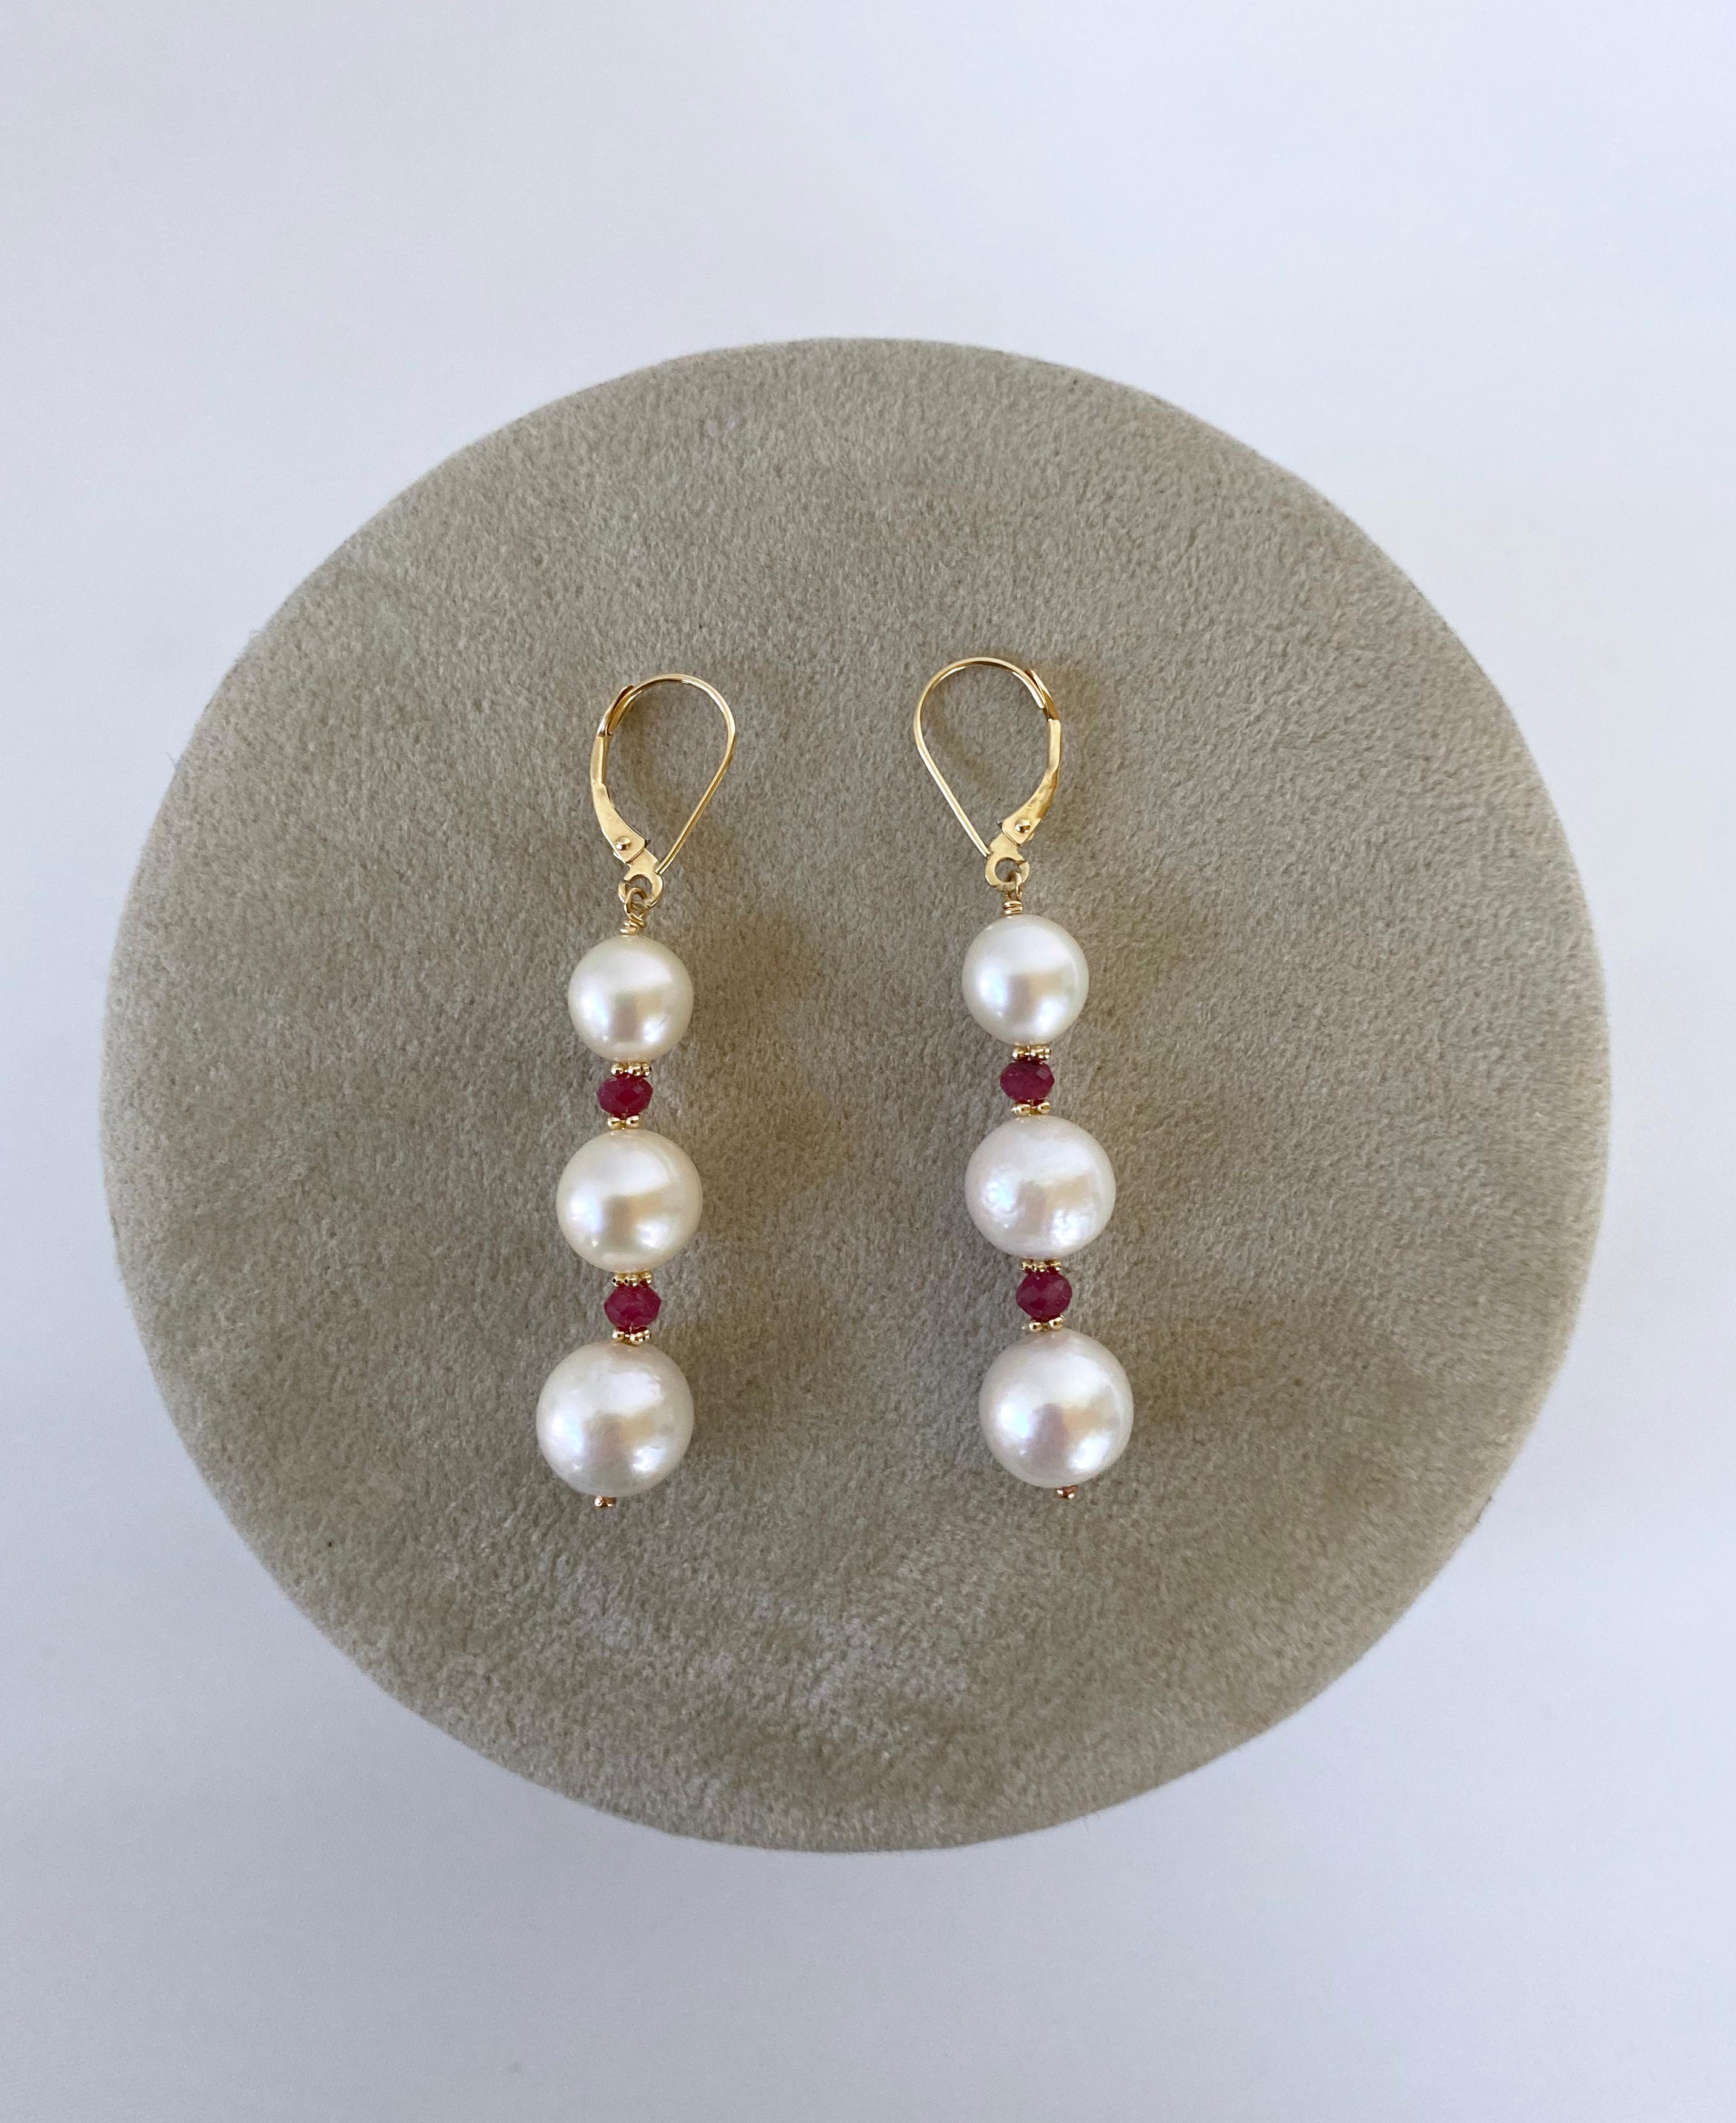 Gorgeous pair of earrings by Marina J. This pair features high luster Pearls with soft iridescence, adorned by striking Rubies and solid 14k Yellow Gold findings! The Rubies display a beautiful Soft Red/Pink color and their semi translucence allows